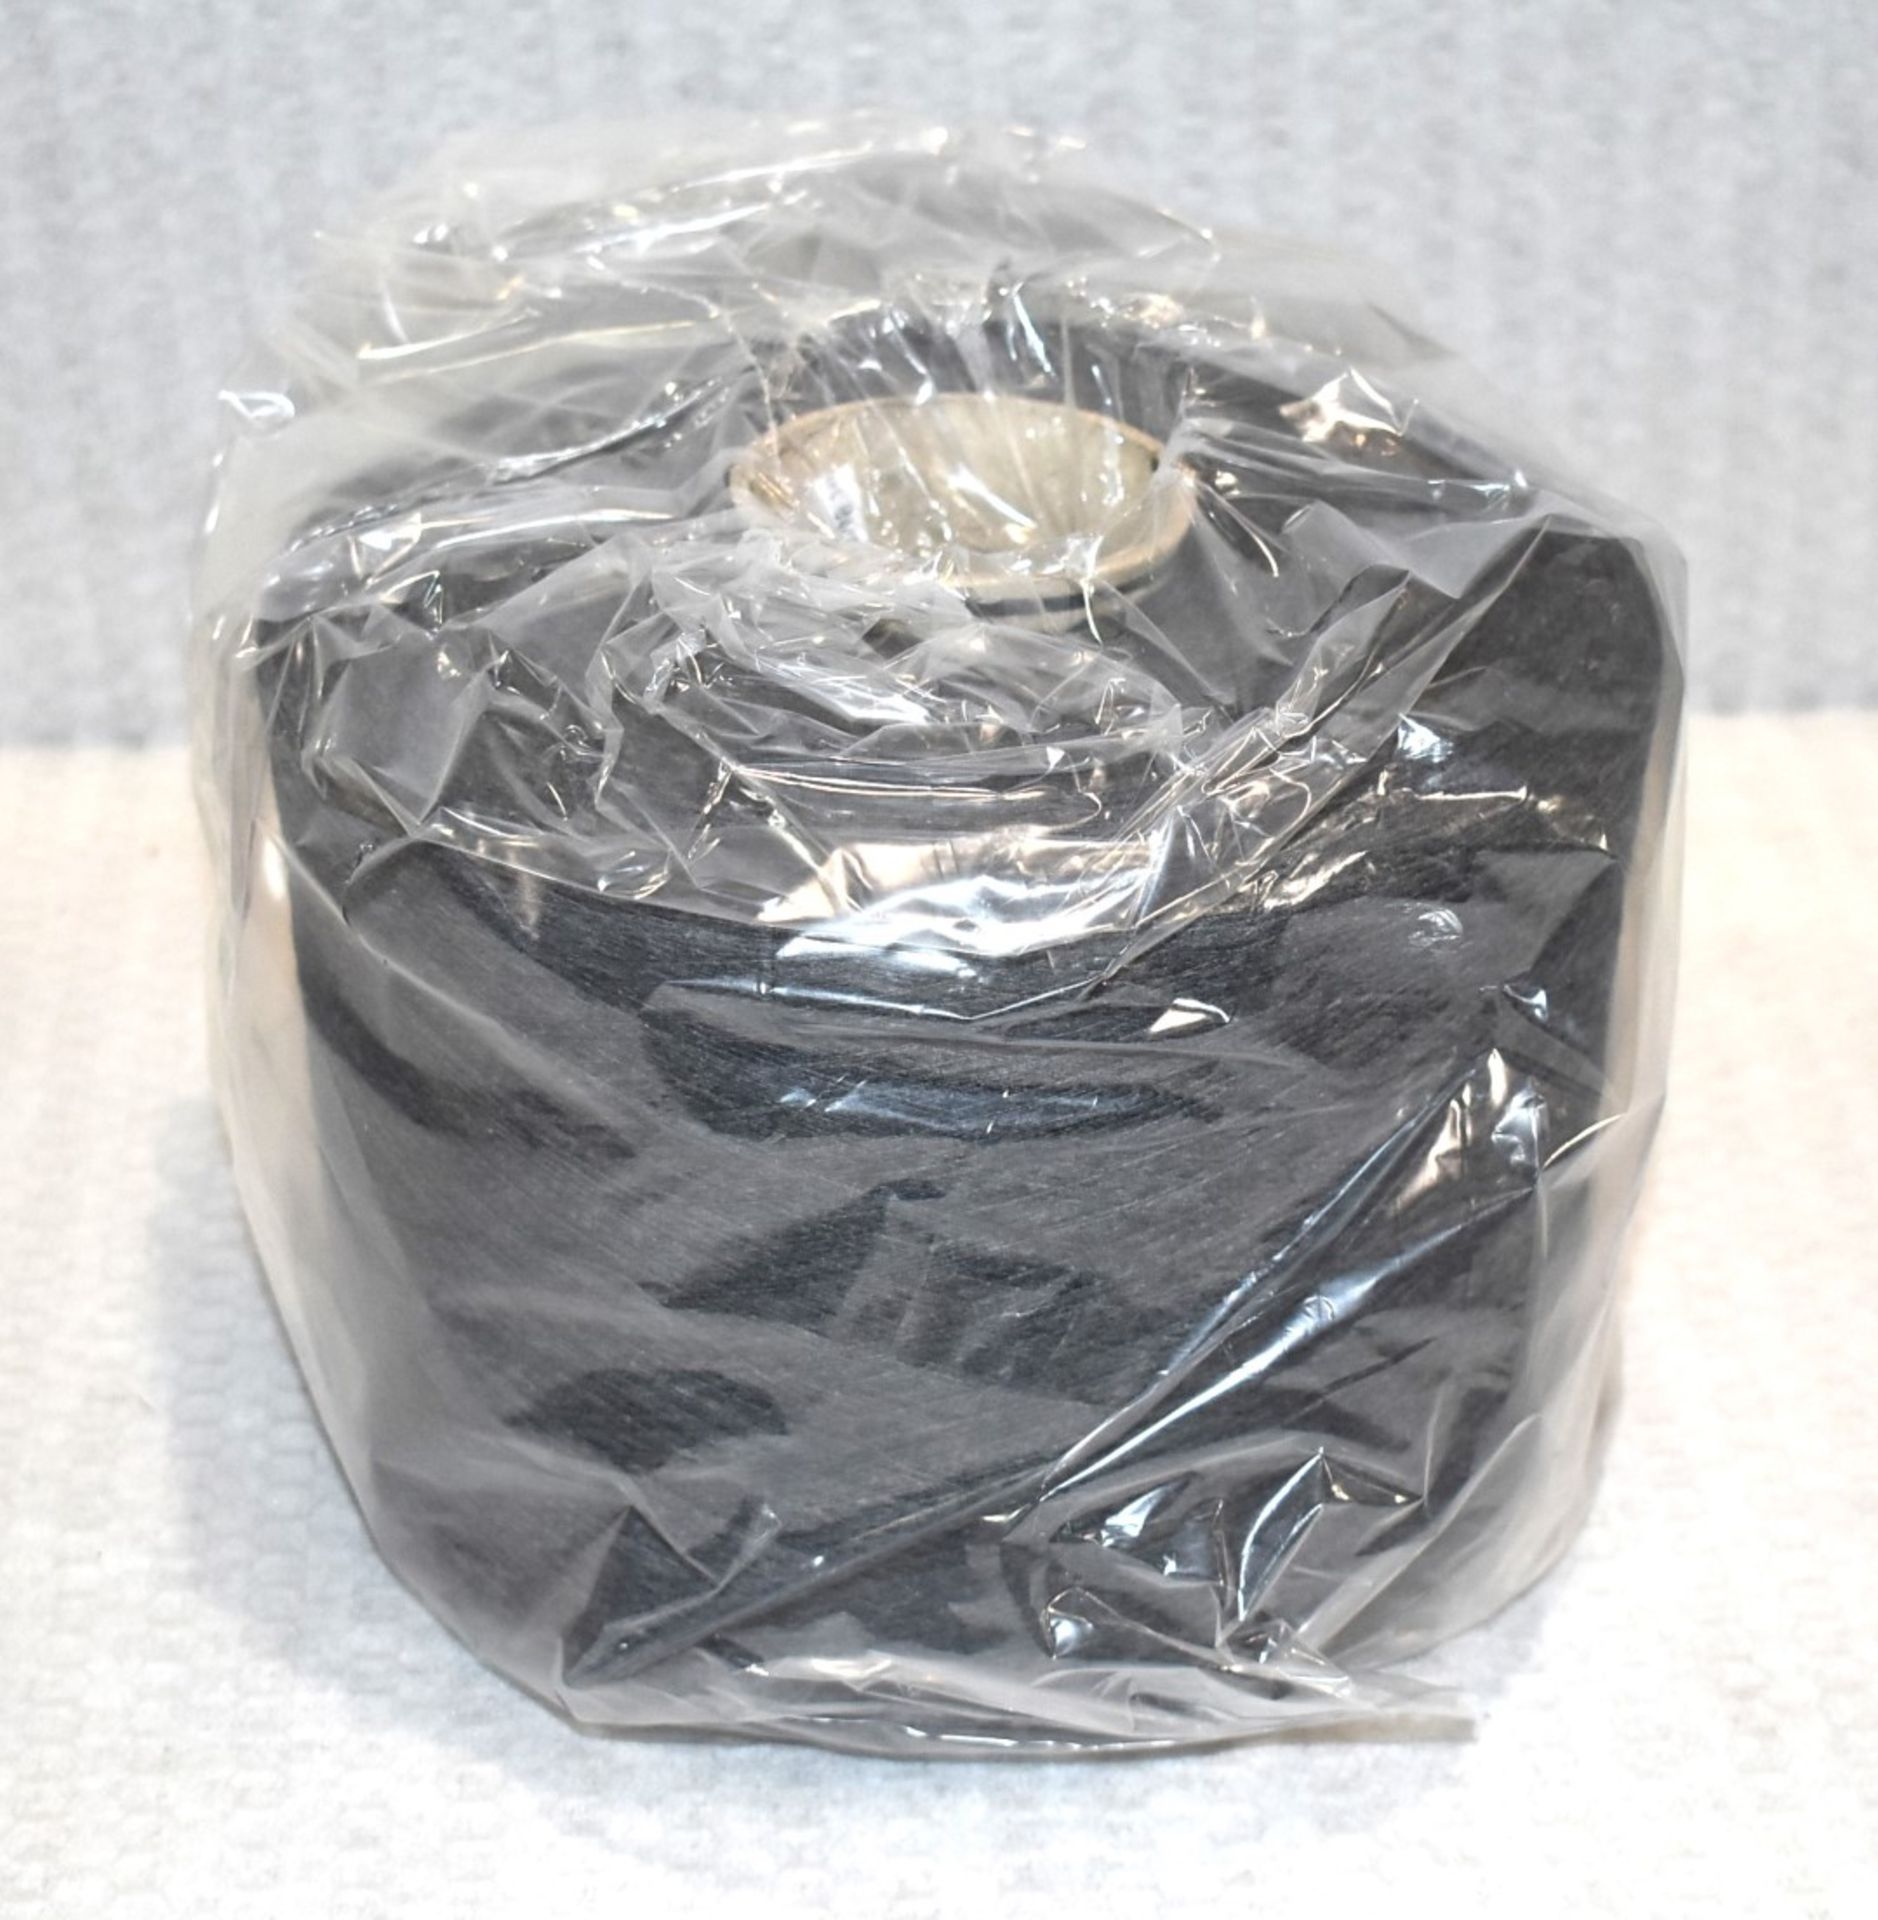 1 x Cone of 1/13 MicroCotton Knitting Yarn - Mid Grey - Approx Weight: 2,500g - New Stock ABL Yarn - Image 14 of 18